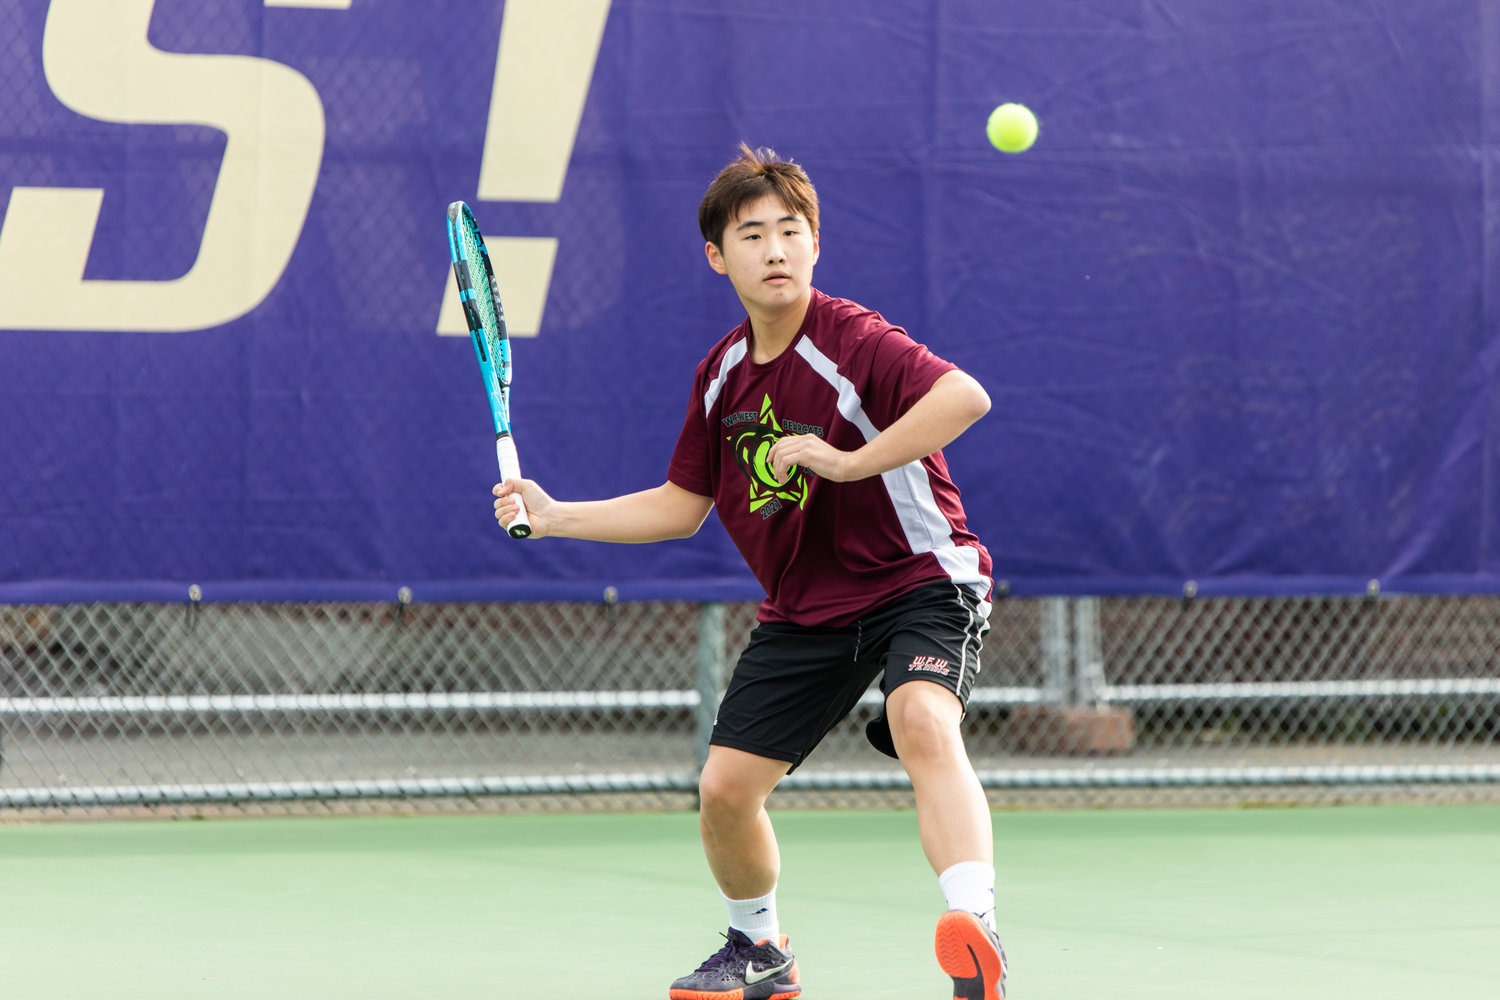 W.F. West's Javyn Han watches the ball during the first set of the 2A boys' singles tennis state competition.  first set of the 2A boys' singles tennis state competition on May 27, 2022.